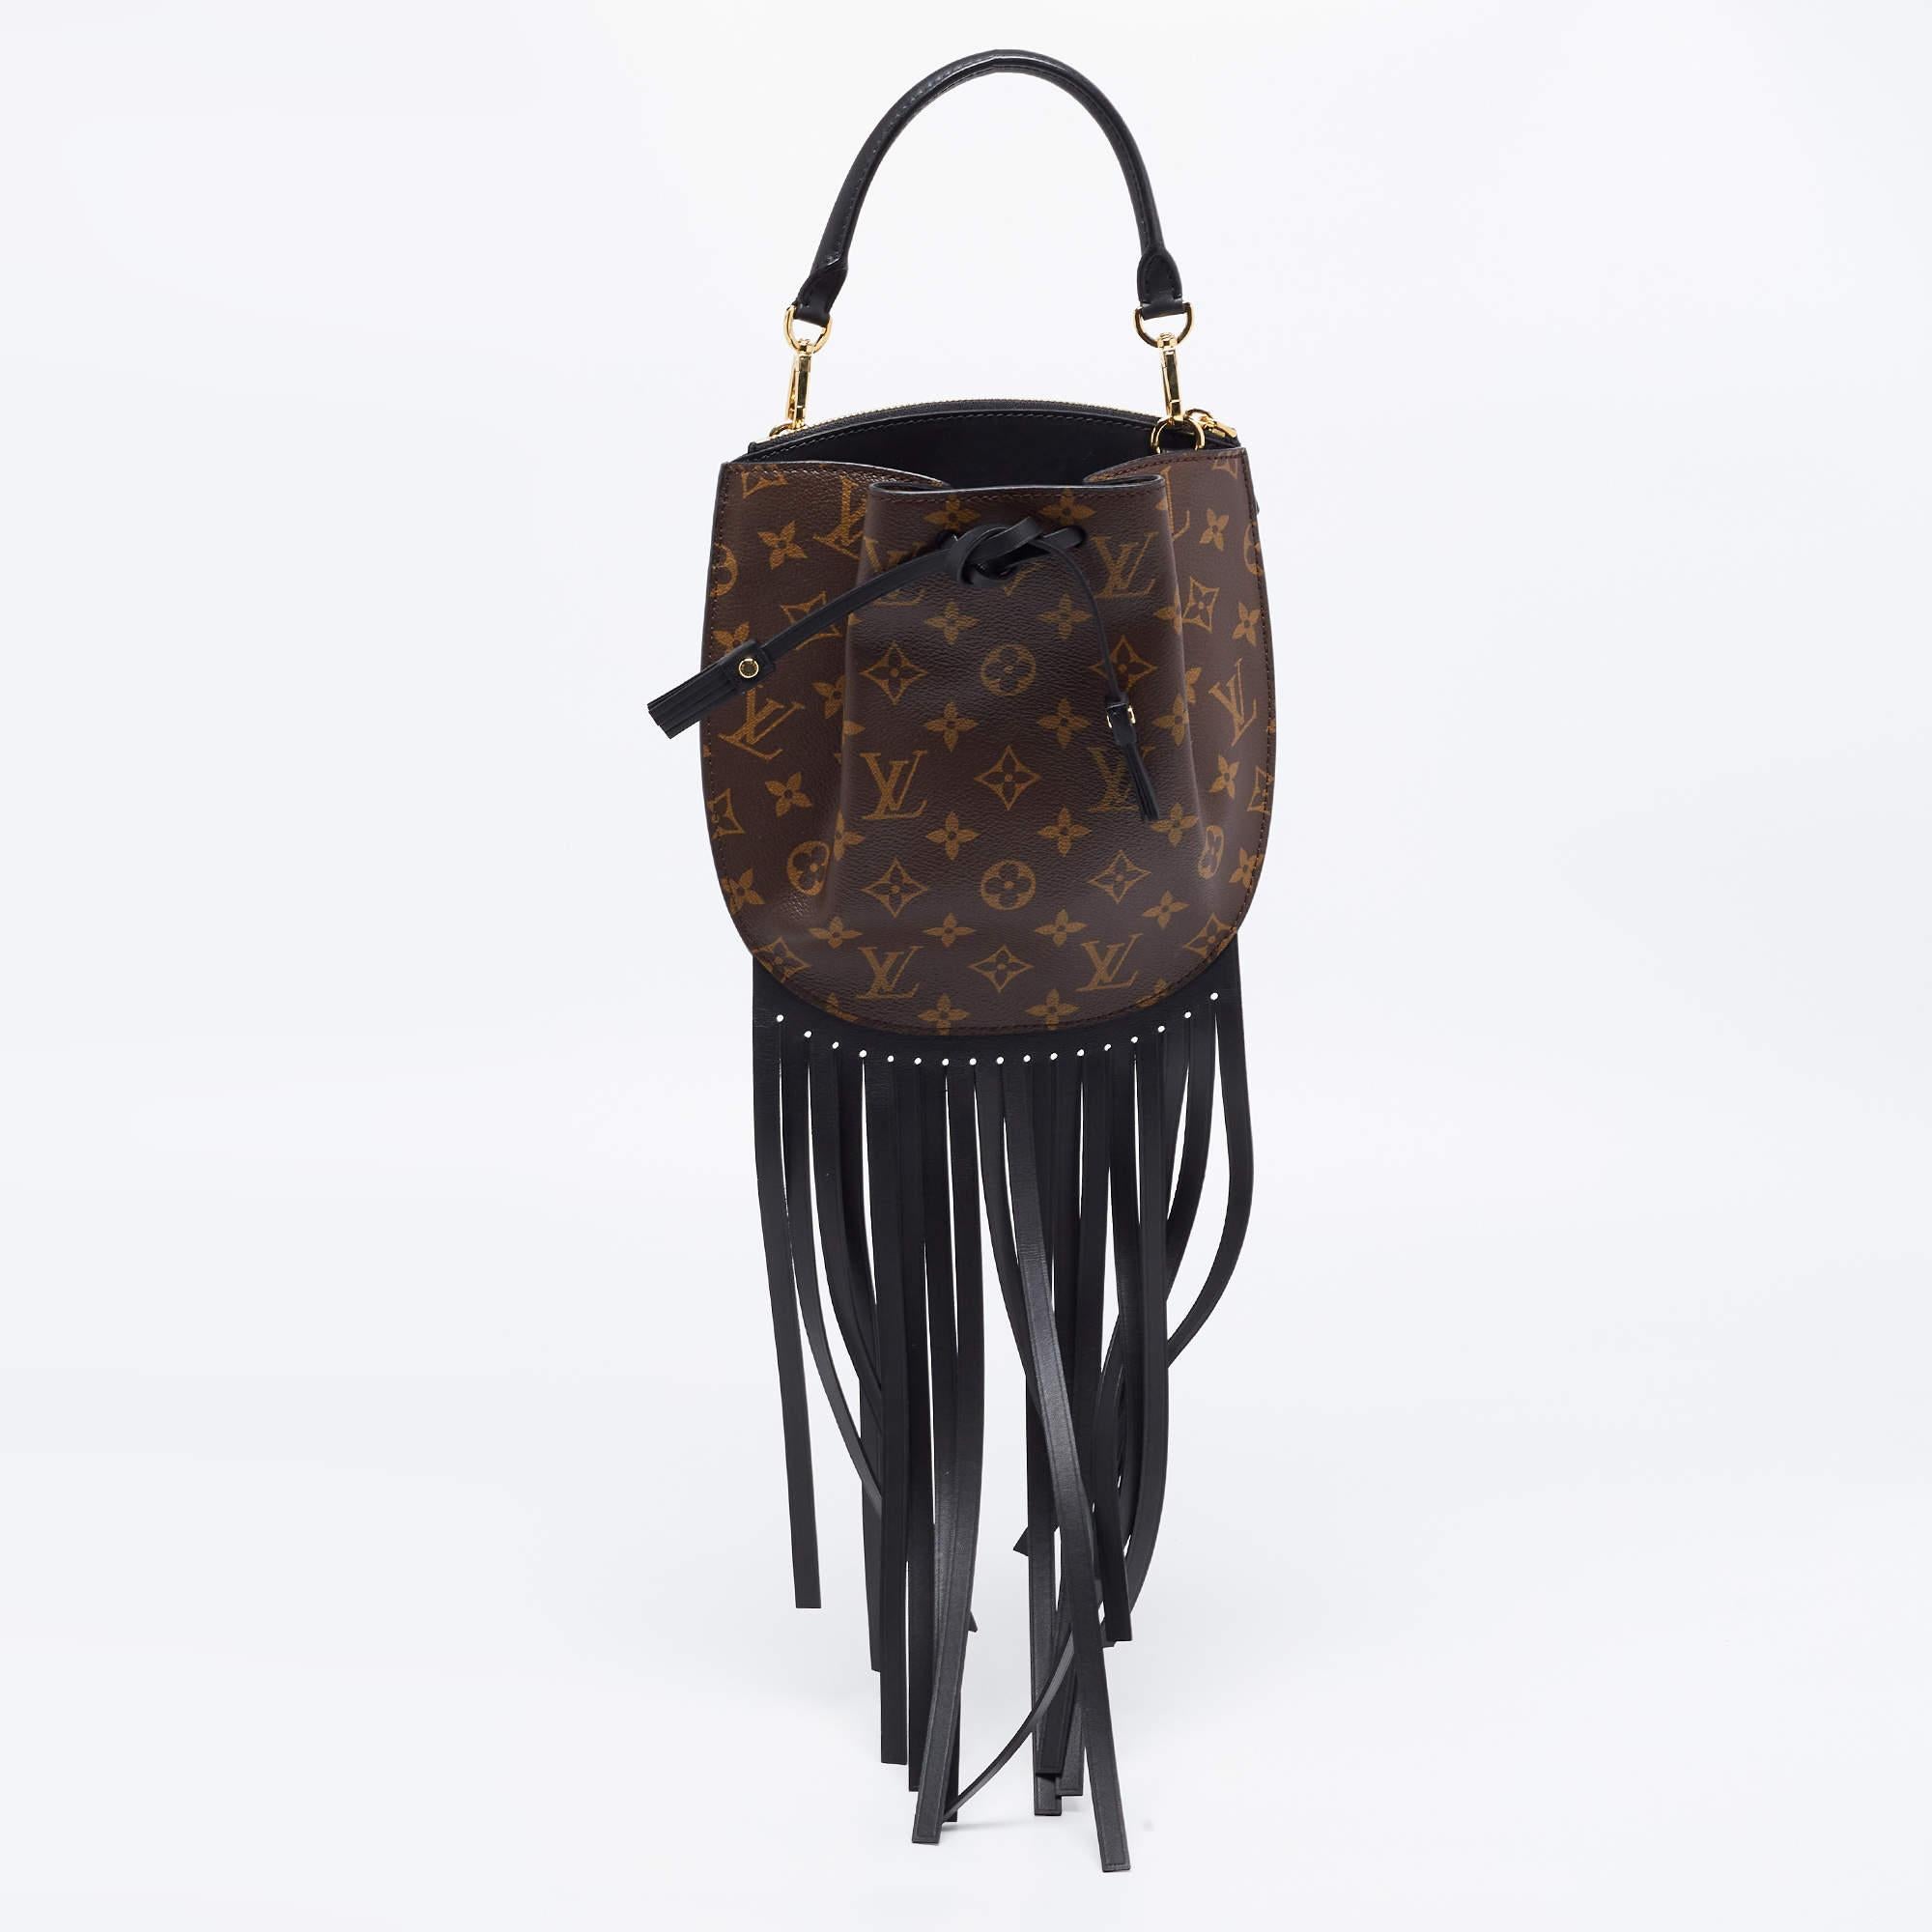 Perfect for conveniently housing your essentials in one place, this Louis Vuitton Noe Fringe bag is a worthy investment. It has notable details and offers a look of luxury.

Includes: Original Dustbag

